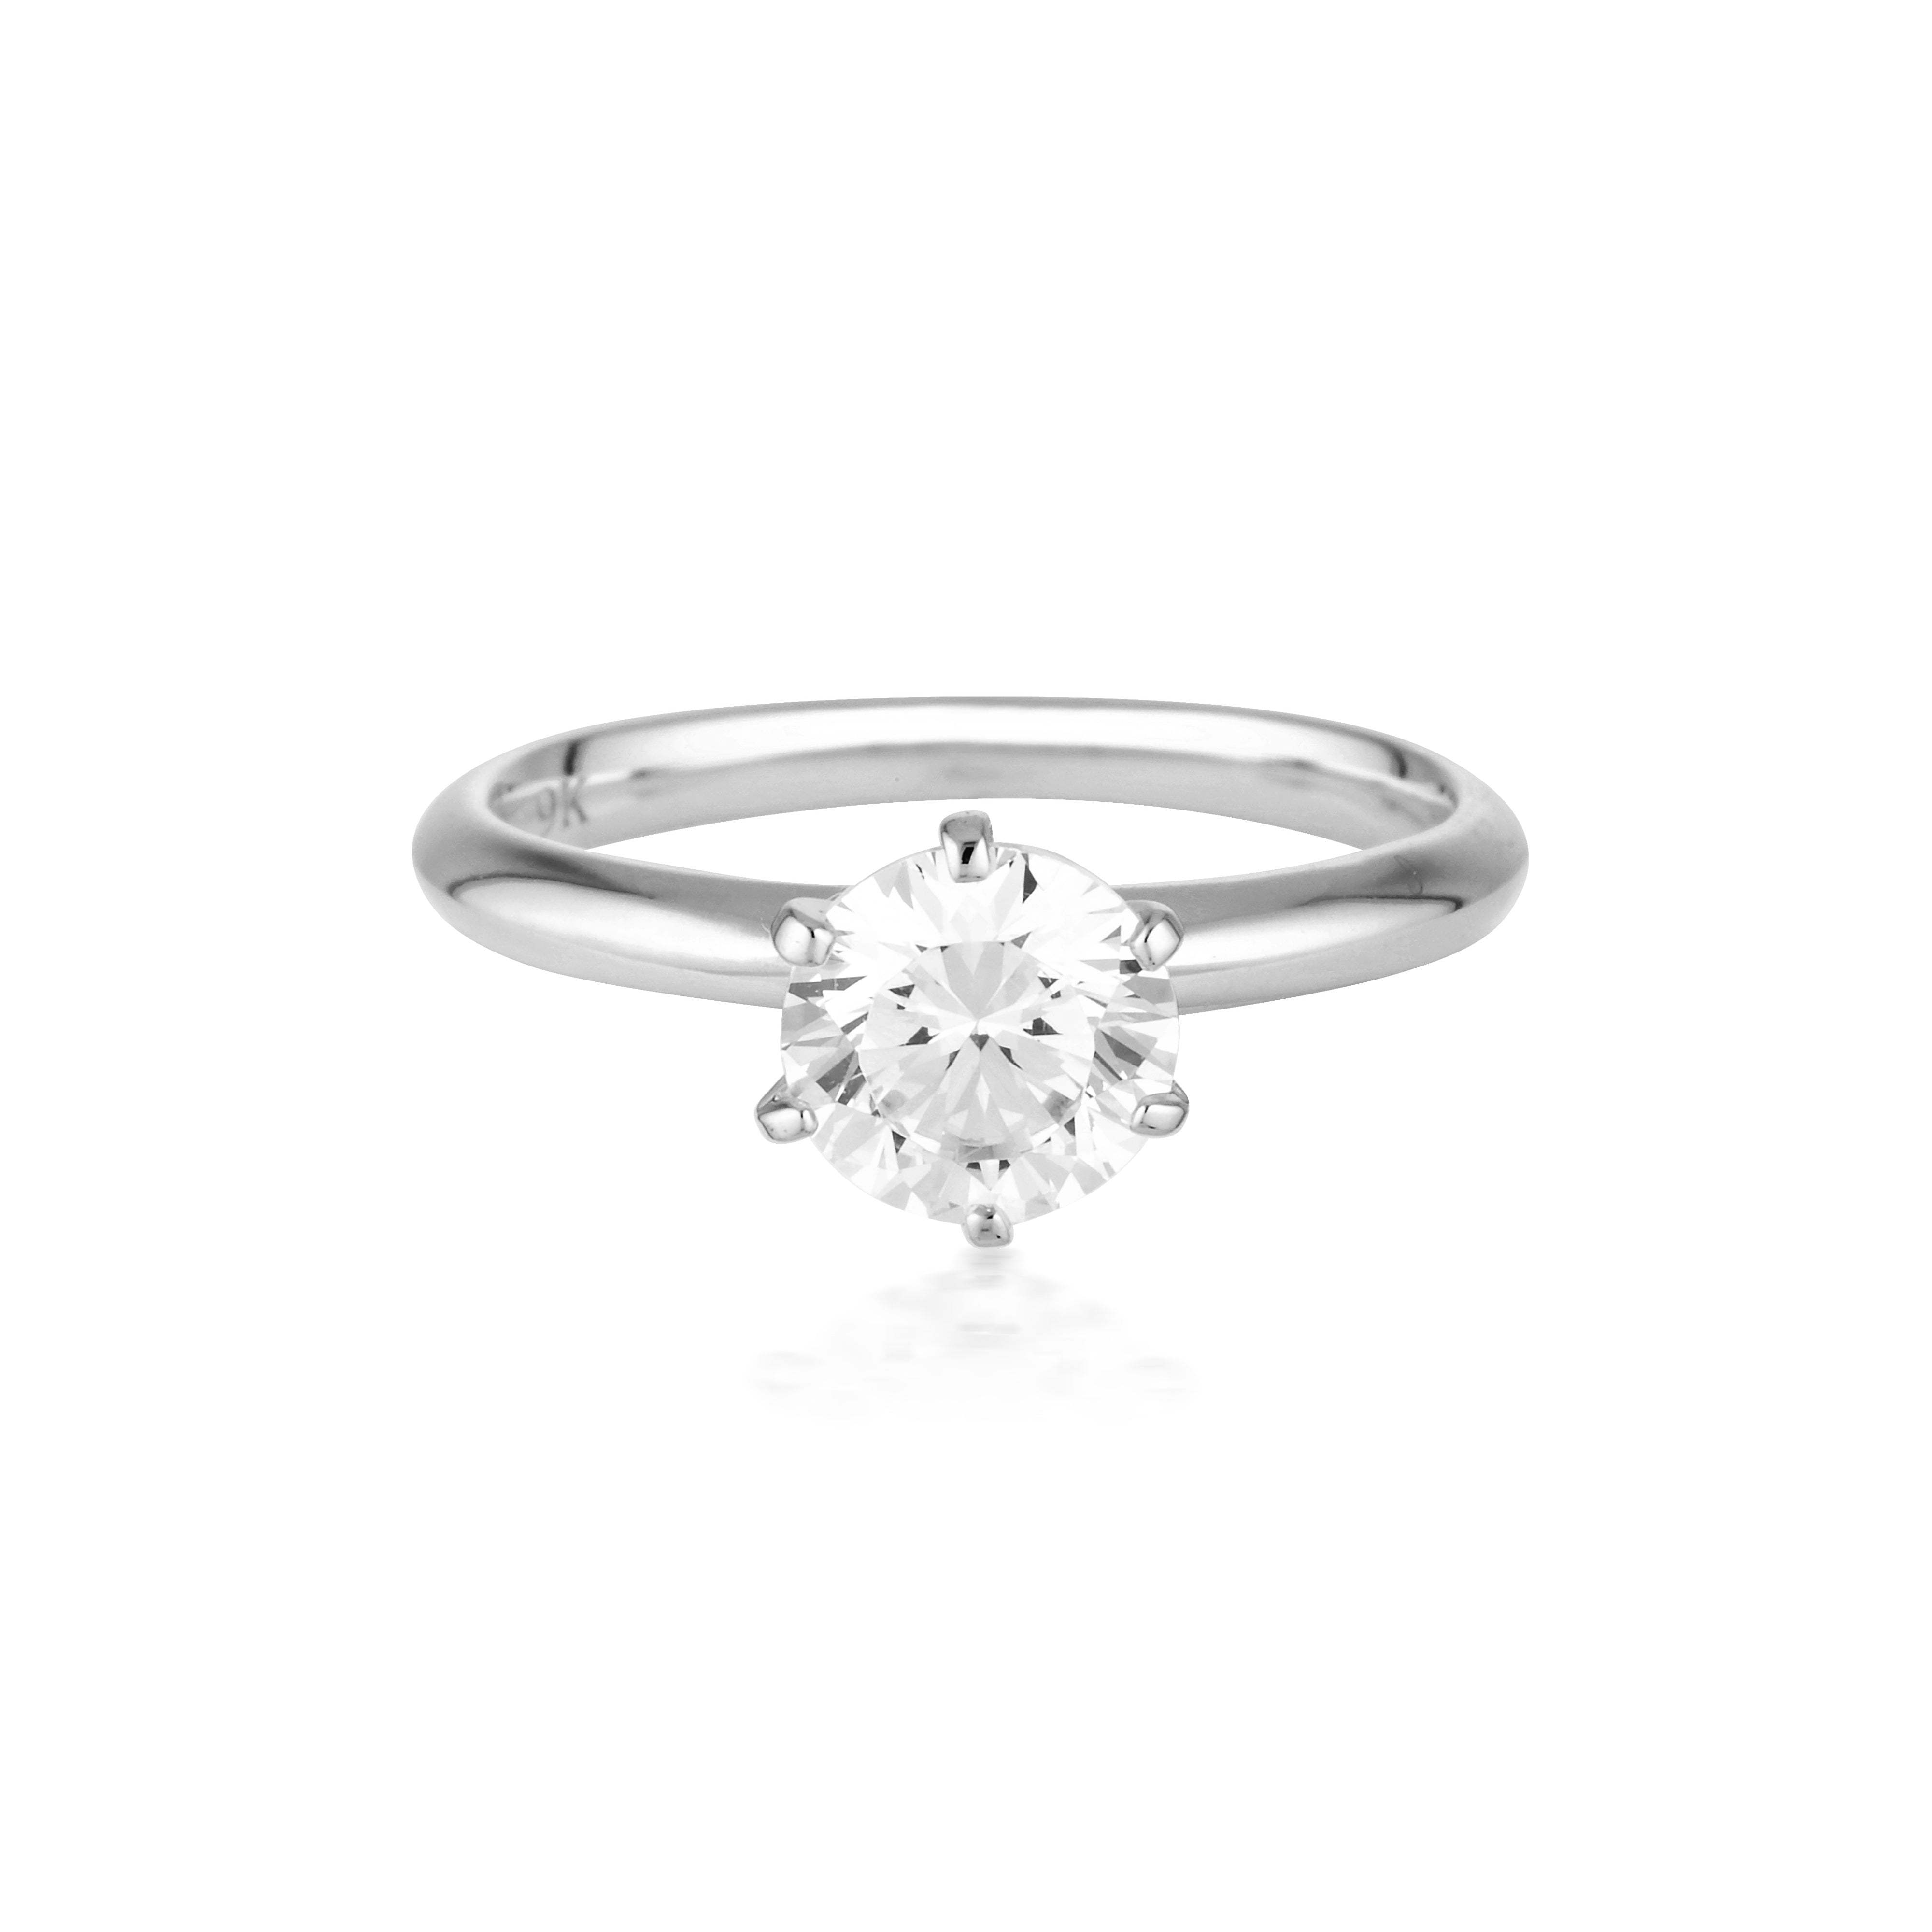 Georgini Gold Round Brilliant Cut 1.25tcw Moissanite Solitaire with Knife Edge Band in 9ct White Gold